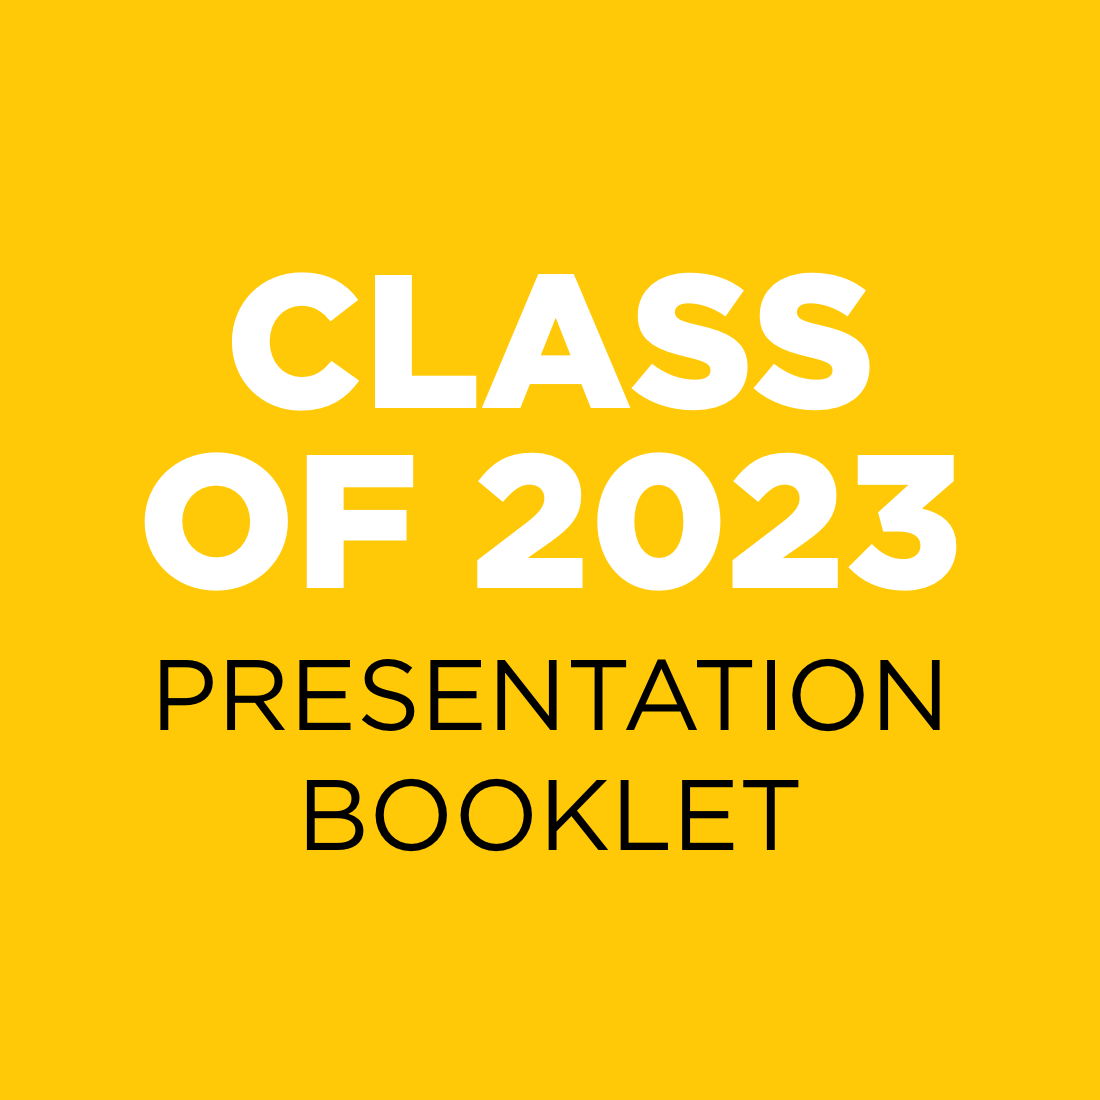 Class of 2023 Presentation Booklet